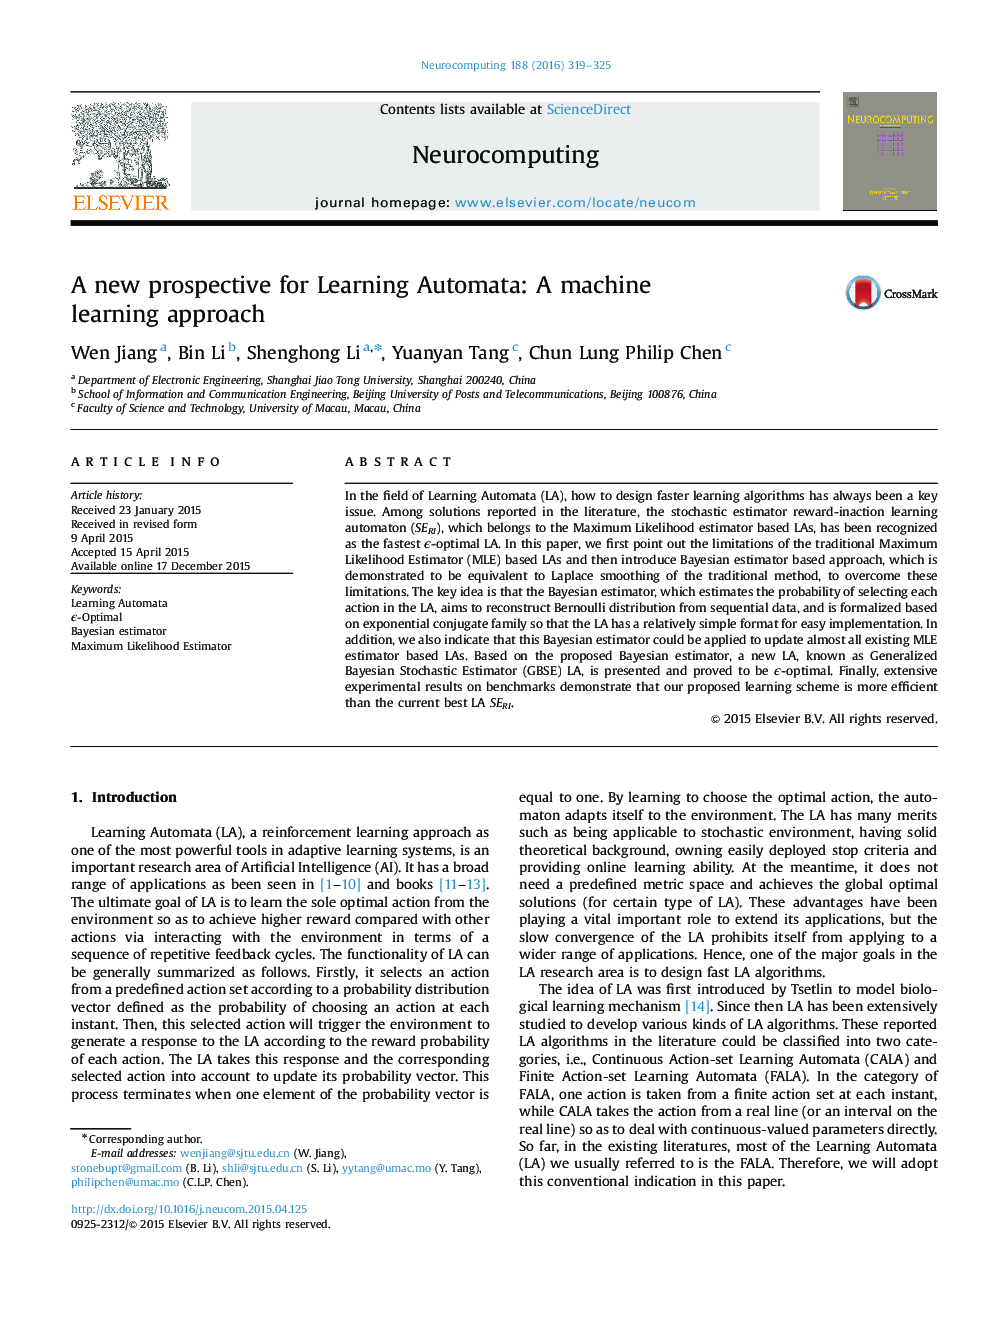 A new prospective for Learning Automata: A machine learning approach